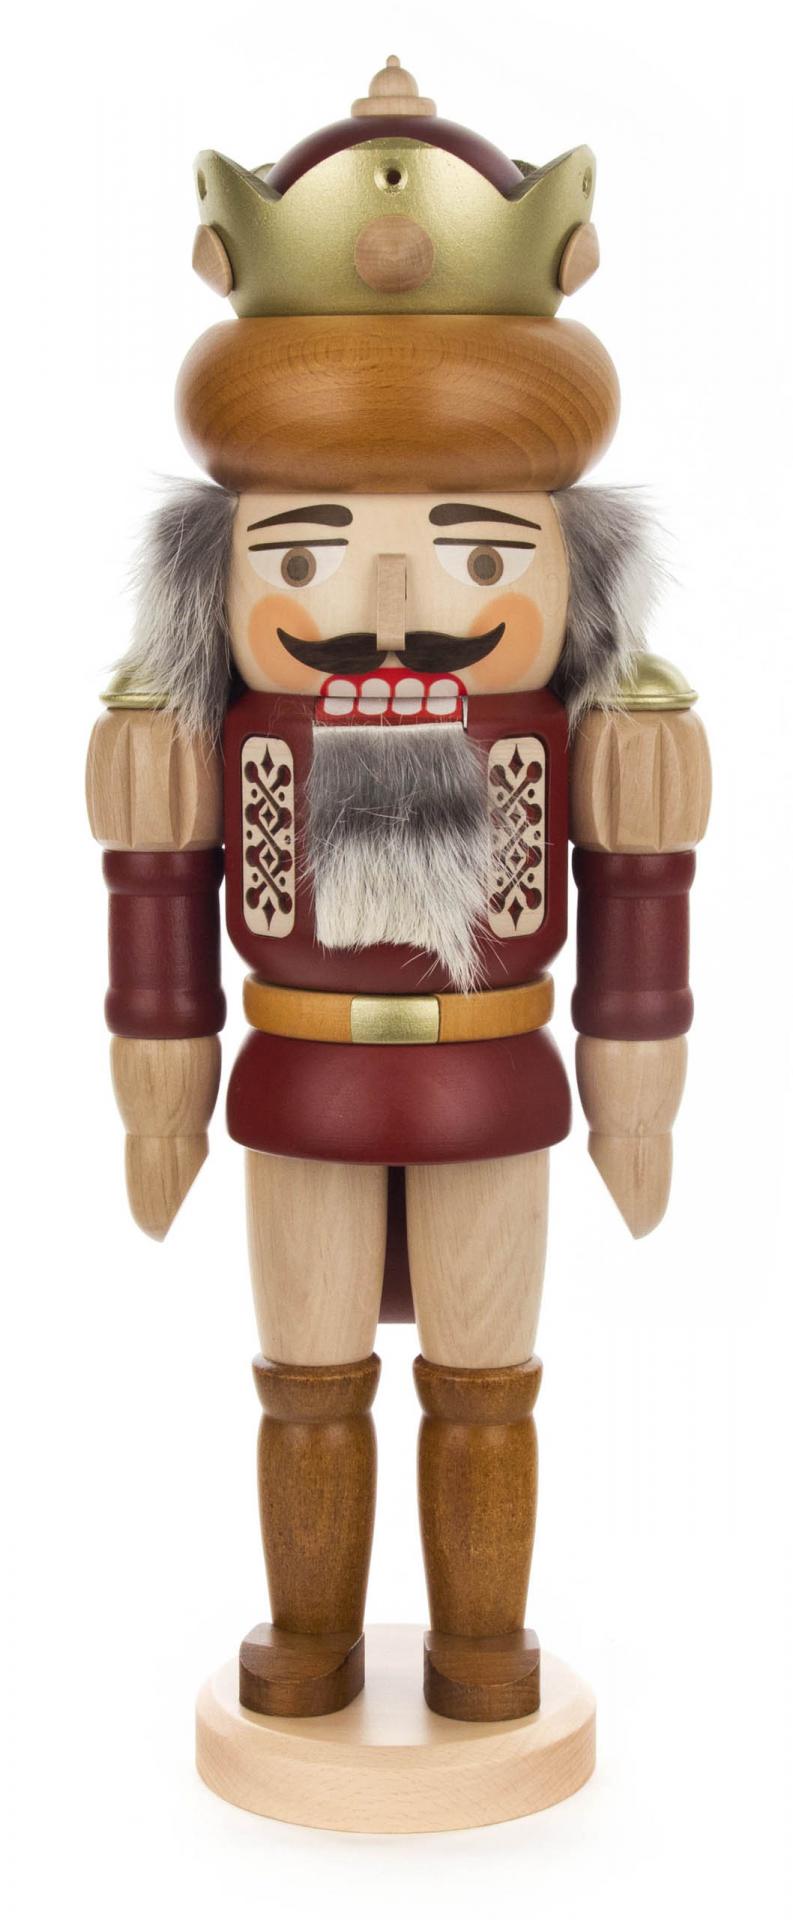 024/065 - King Nutcracker with Natural & Brown Accents